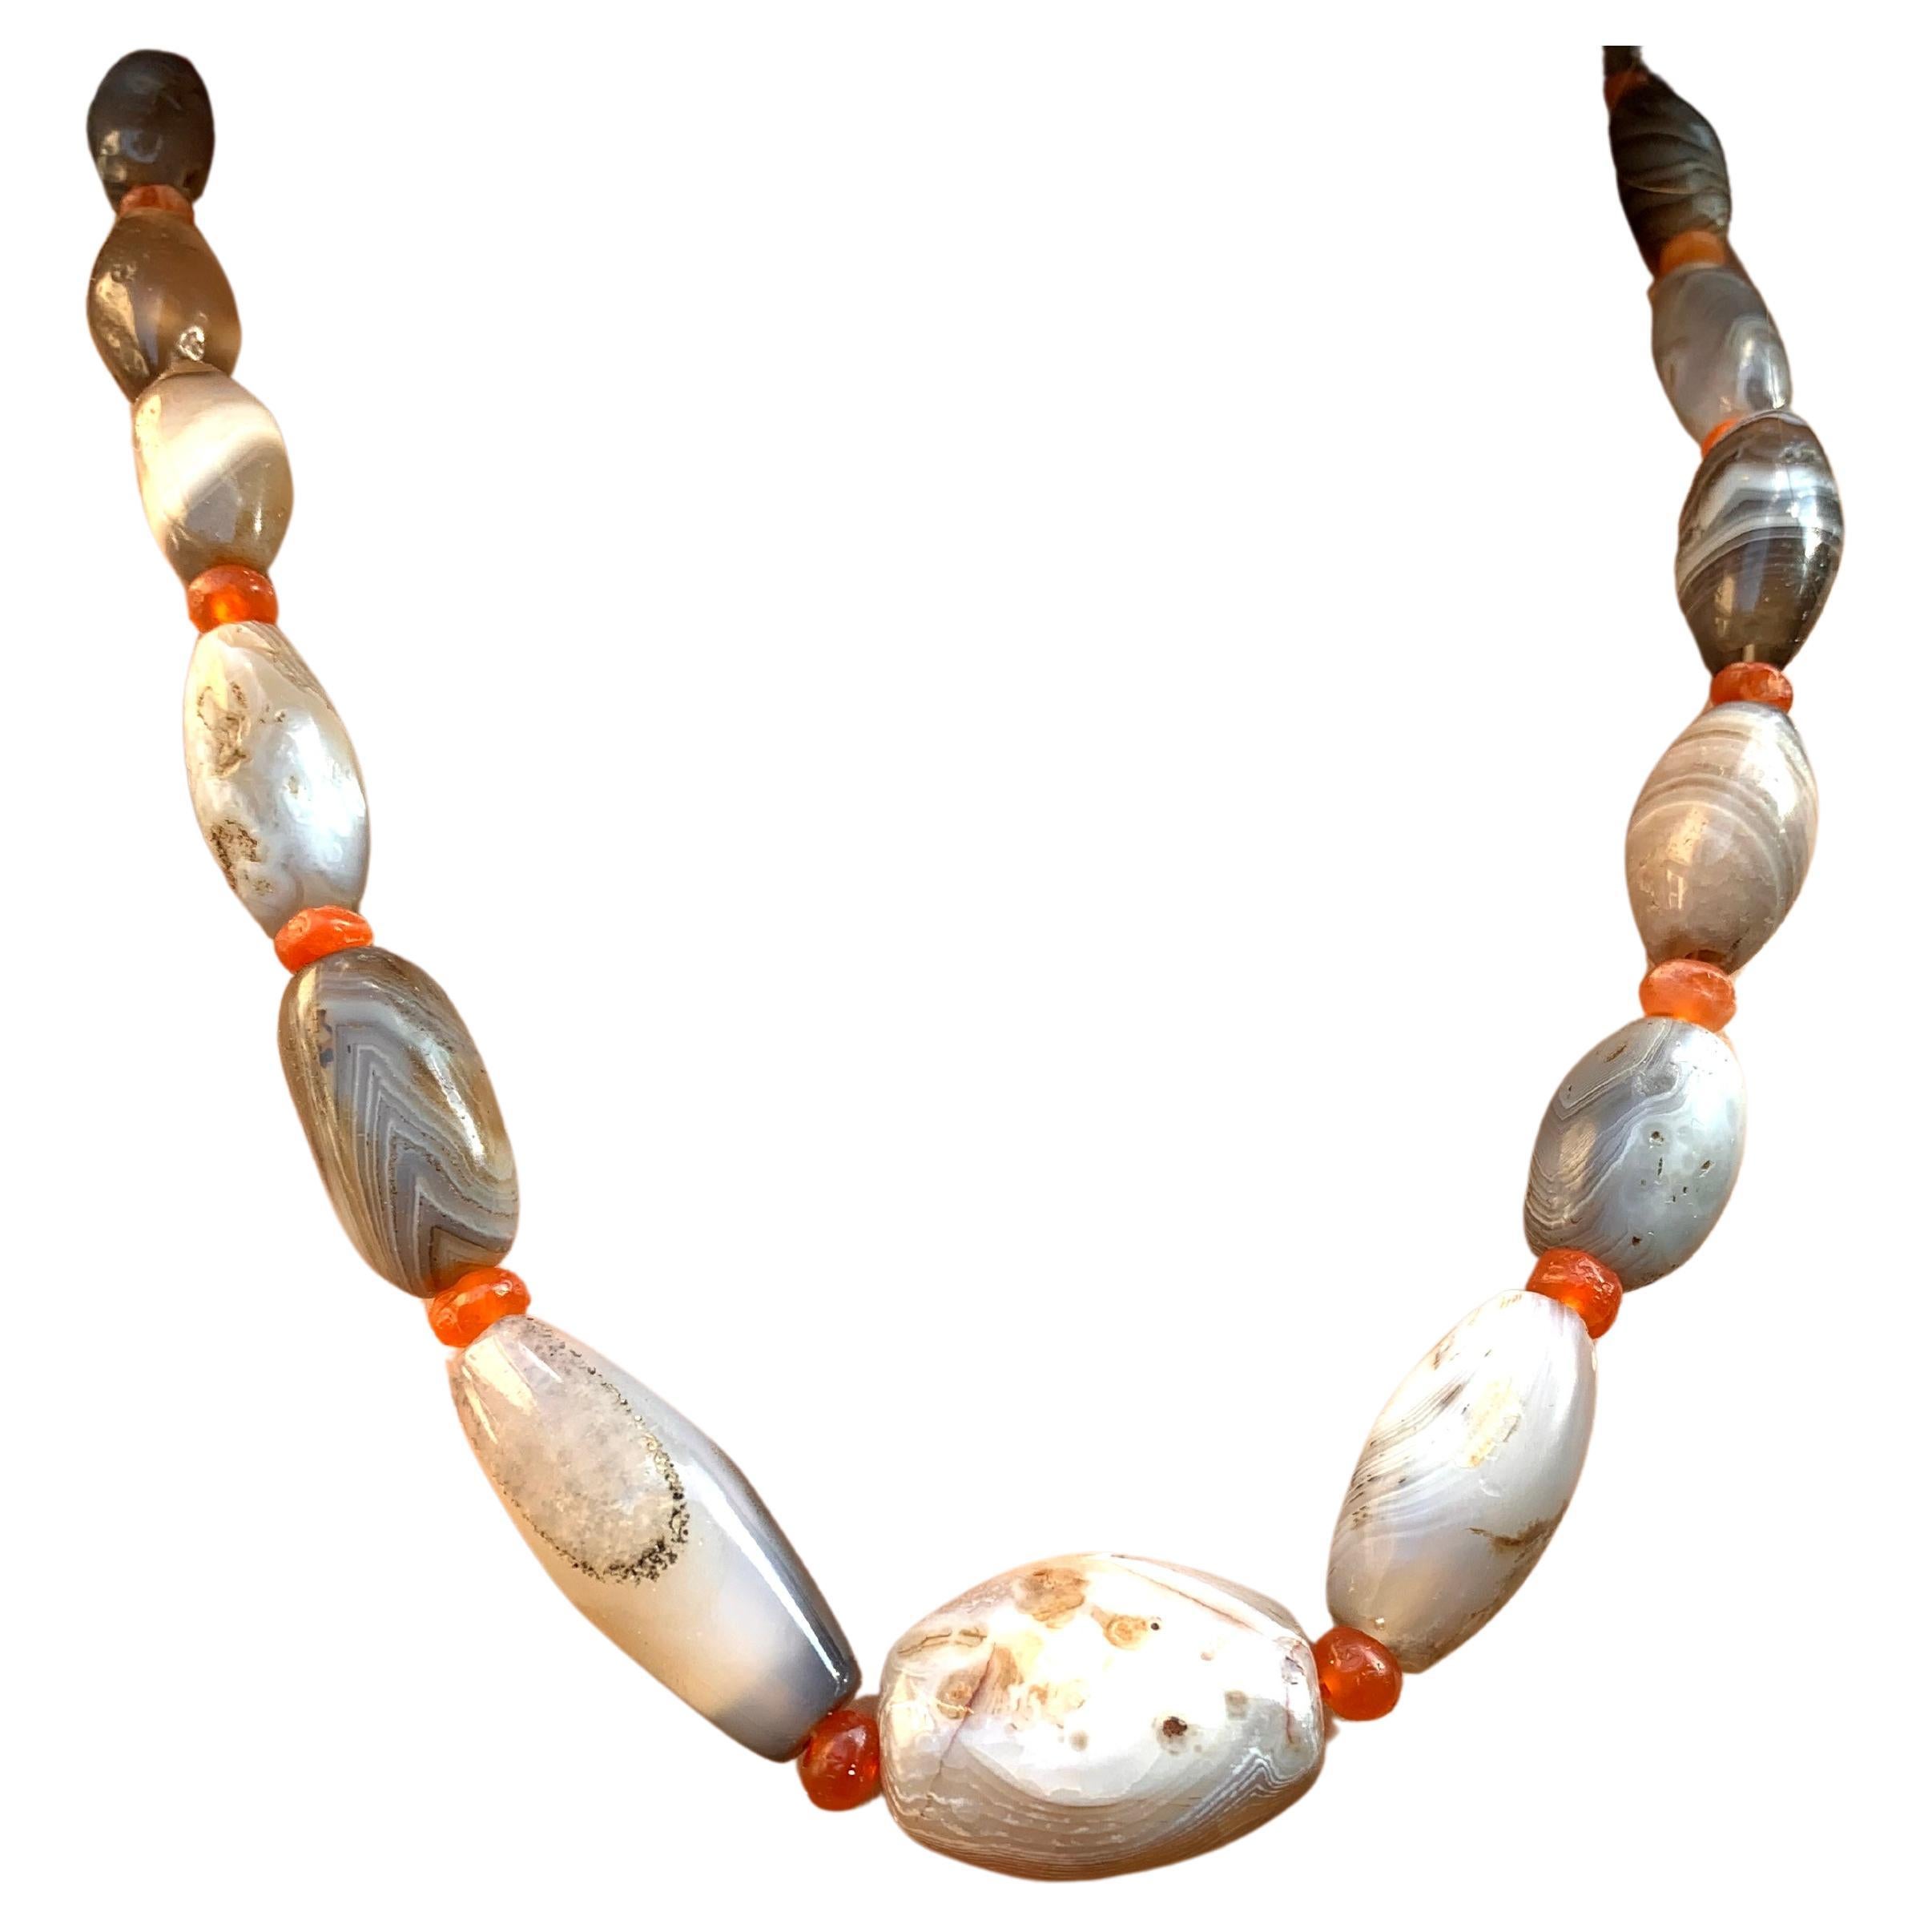 Ancient Bactrian Agate and Carnelian Bead Necklace, 3rd-2nd Millennium B.C.